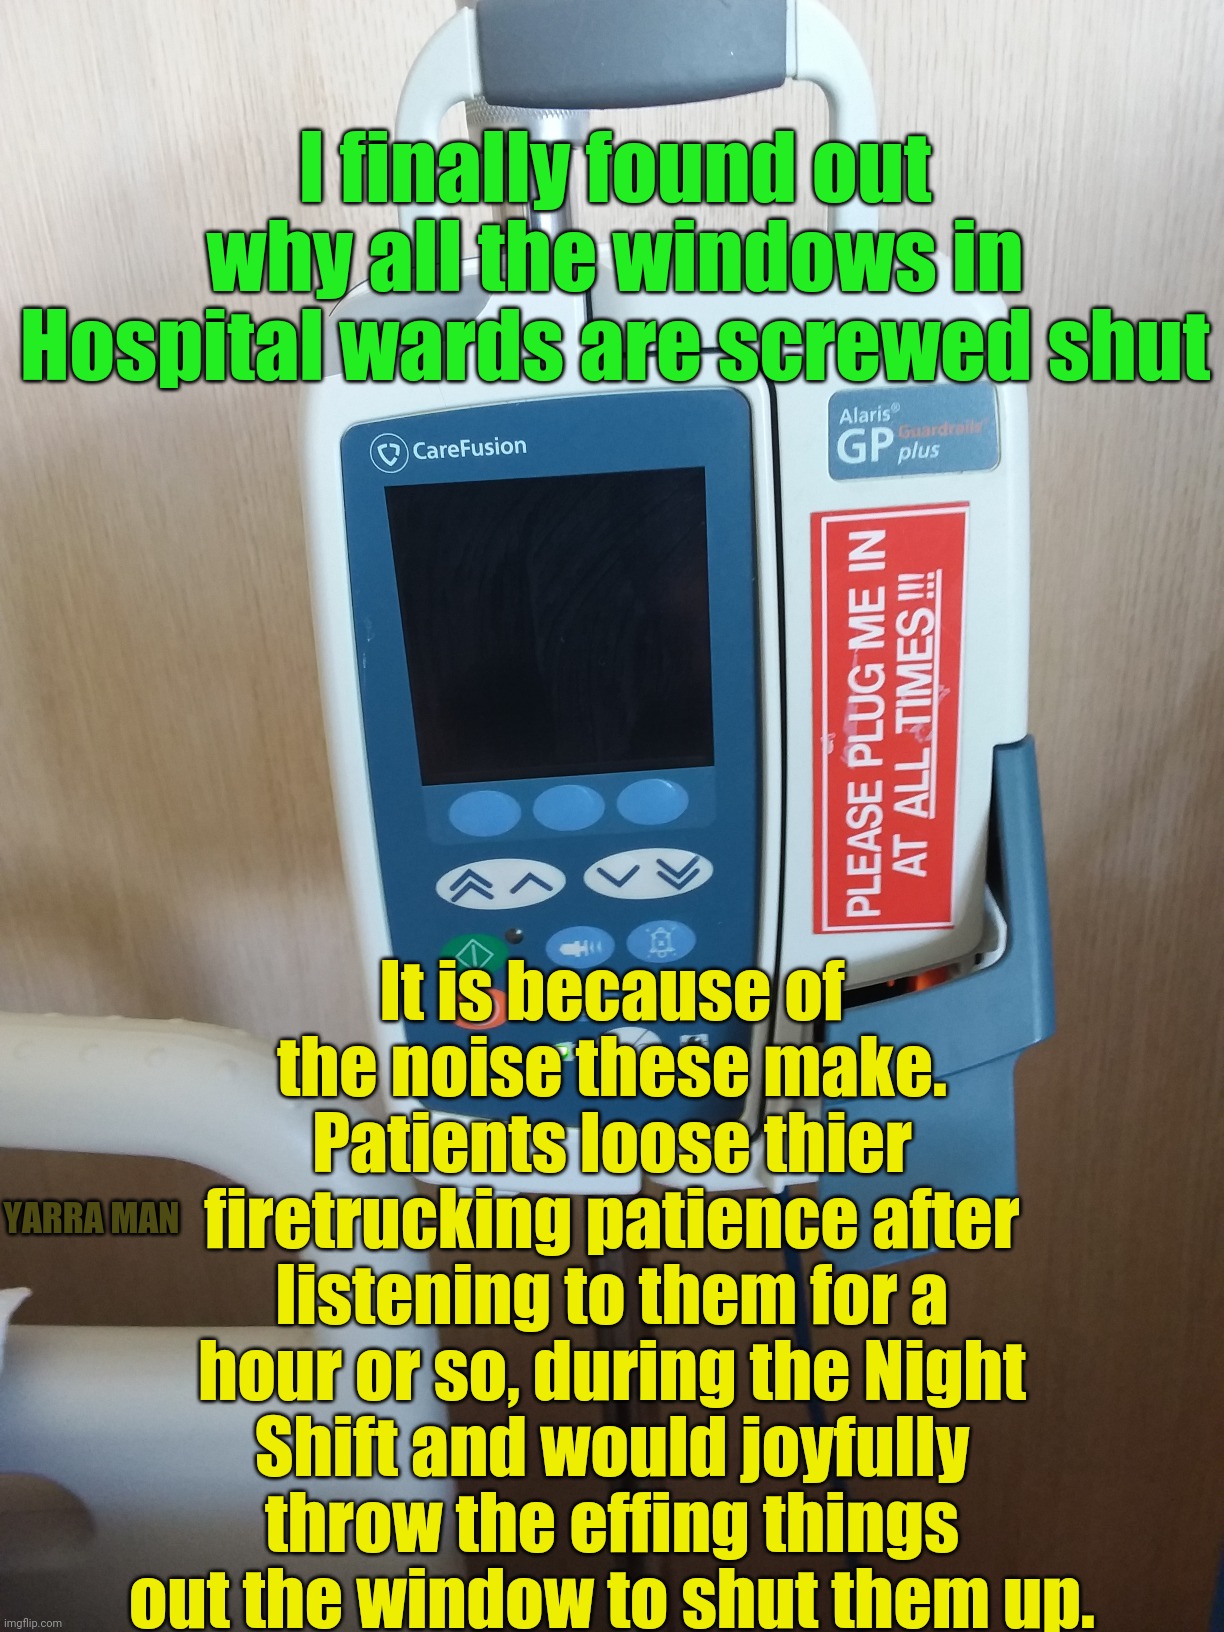 Hospitaal patients | I finally found out why all the windows in Hospital wards are screwed shut; It is because of the noise these make. Patients loose thier firetrucking patience after listening to them for a hour or so, during the Night Shift and would joyfully throw the effing things out the window to shut them up. YARRA MAN | image tagged in hospital safety | made w/ Imgflip meme maker